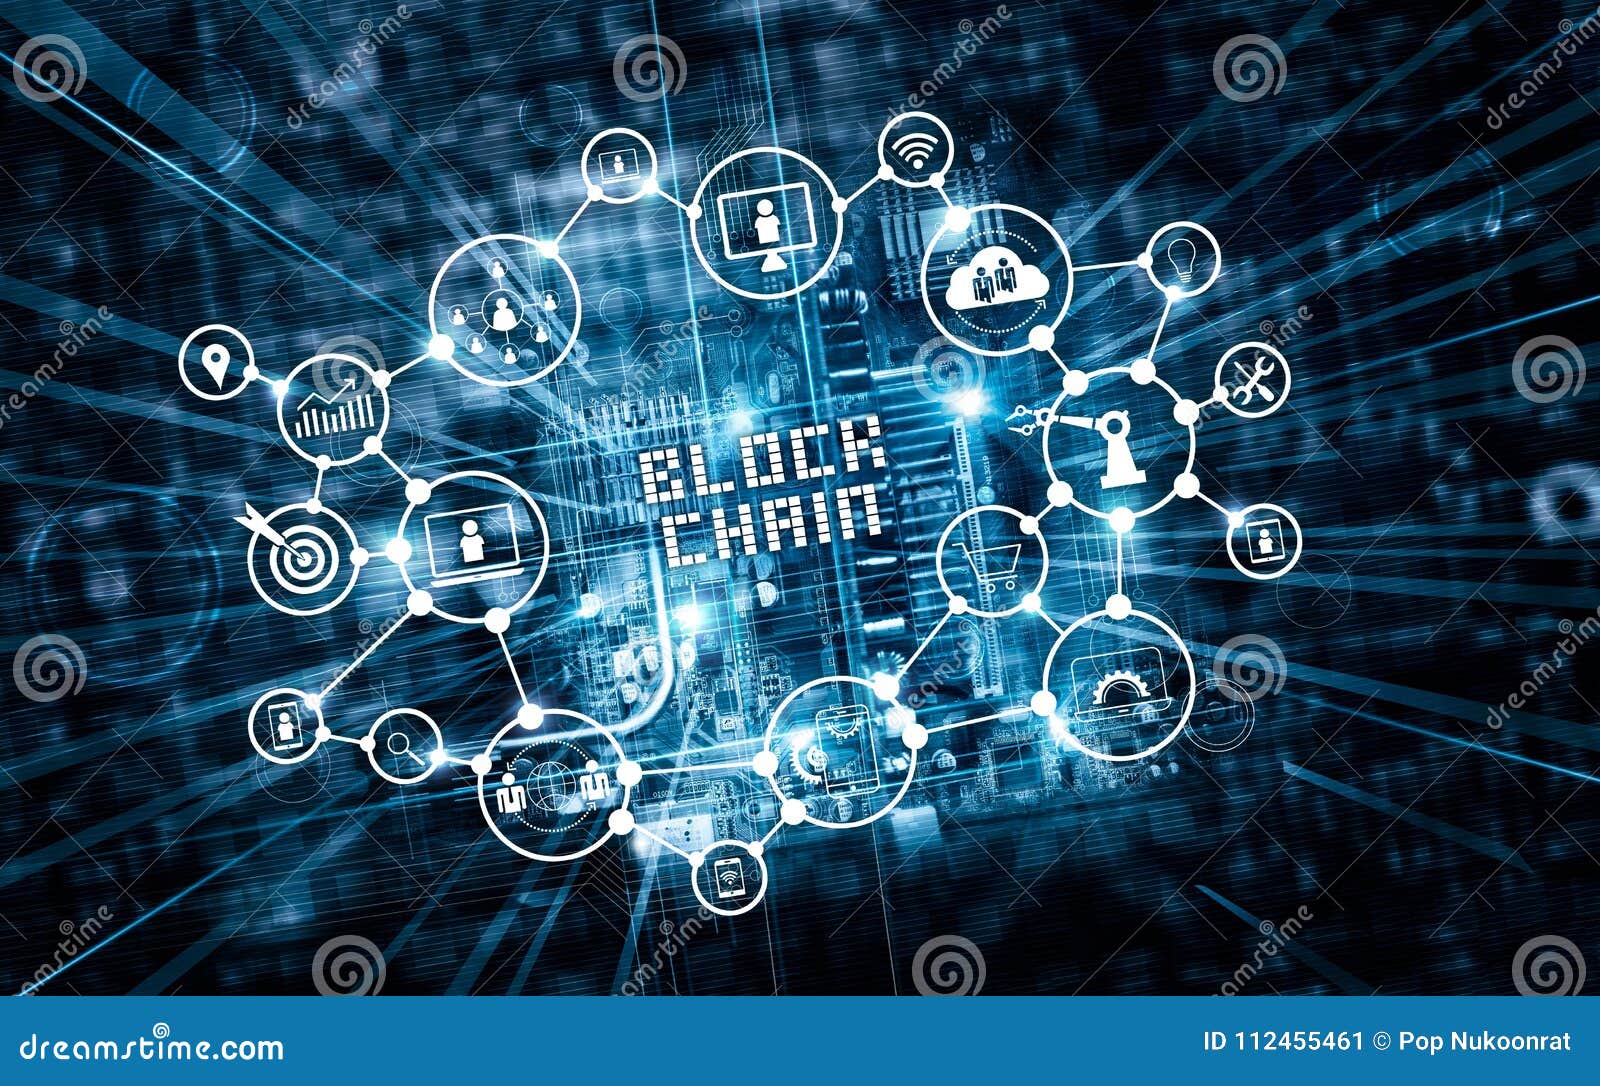 blockchain technology and network concept. block chain text and